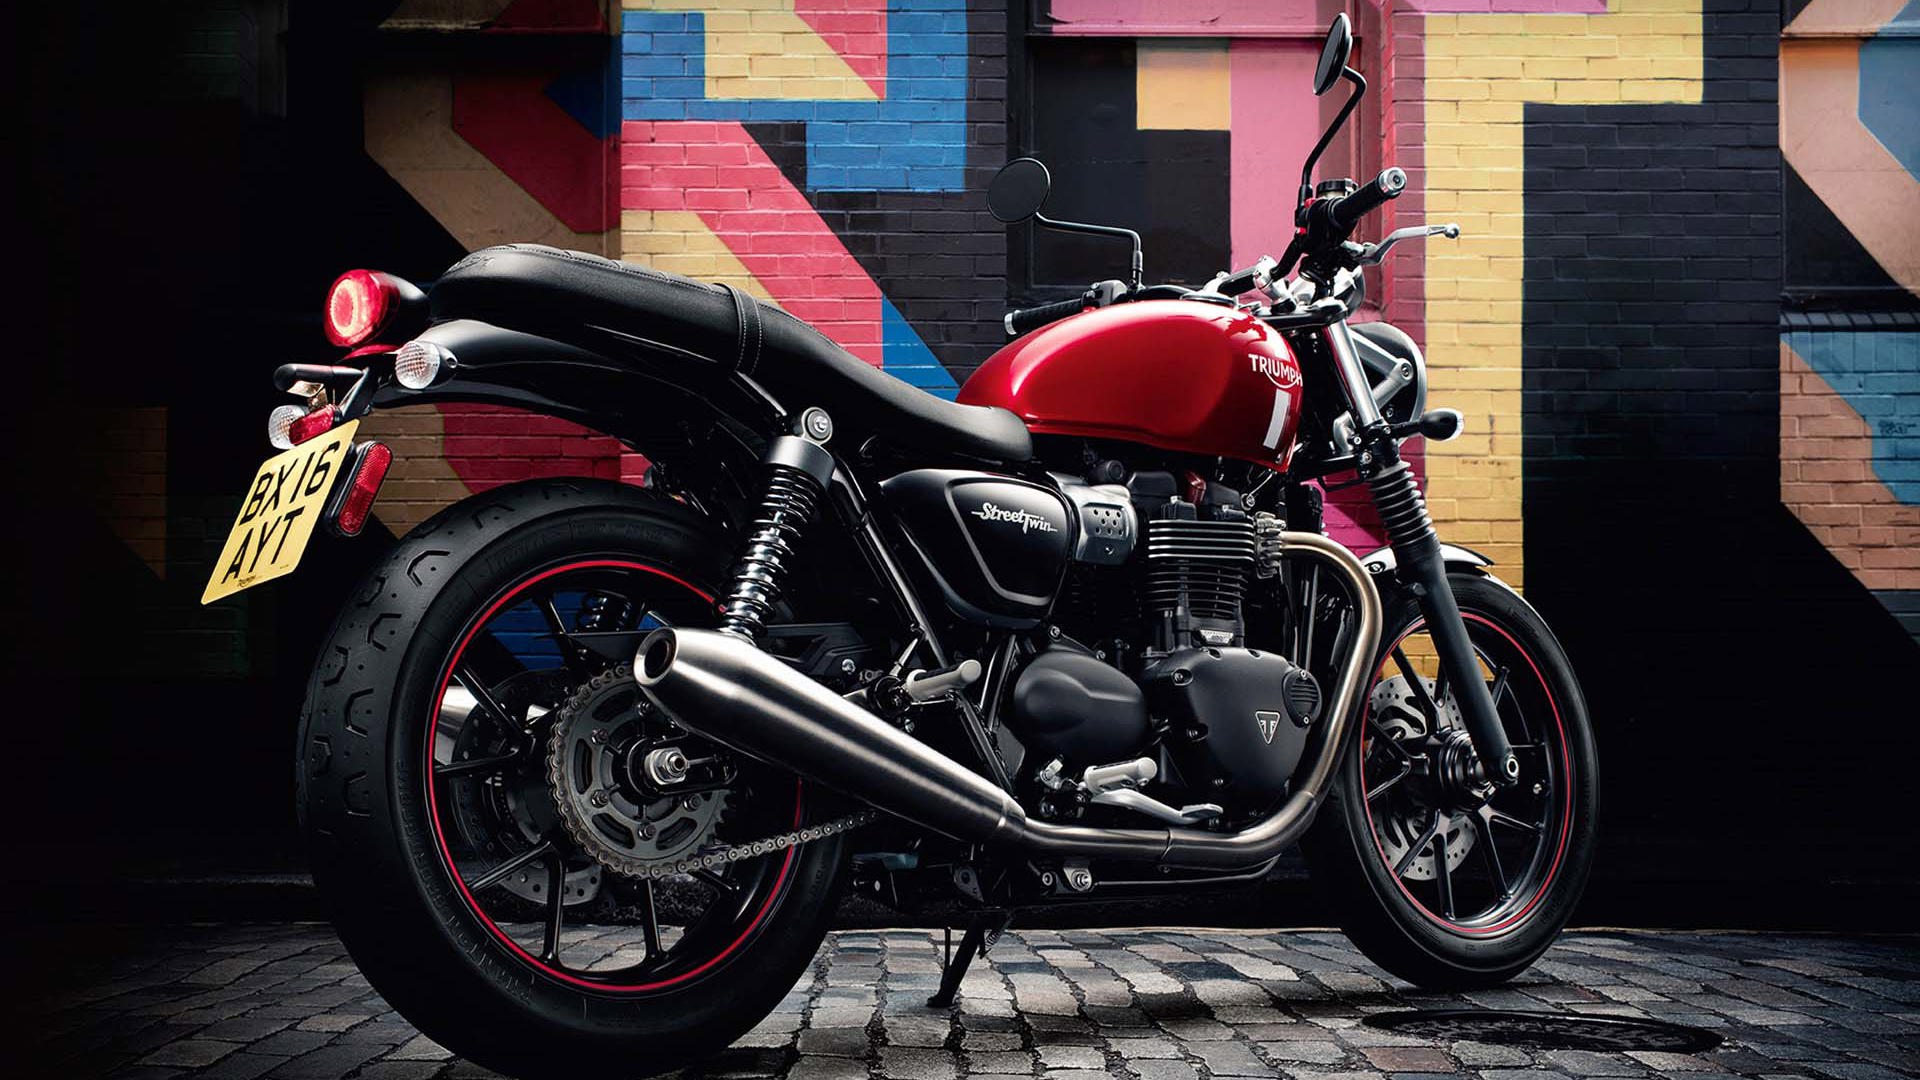 Triumph’s new entry level Bonneville, the 2016 Street Twin is a 900cc parallel twin designed to charm the retro-set with authentic British antique styling and low-fuss, lazy riding. The 54 hp engine might make the traction control a little pointless, but the engine has been tuned to for torque. An accessible 59 lb-ft of torque from 3,200 rpm helps pull the 217 kg bike to traffic speeds with little effort.